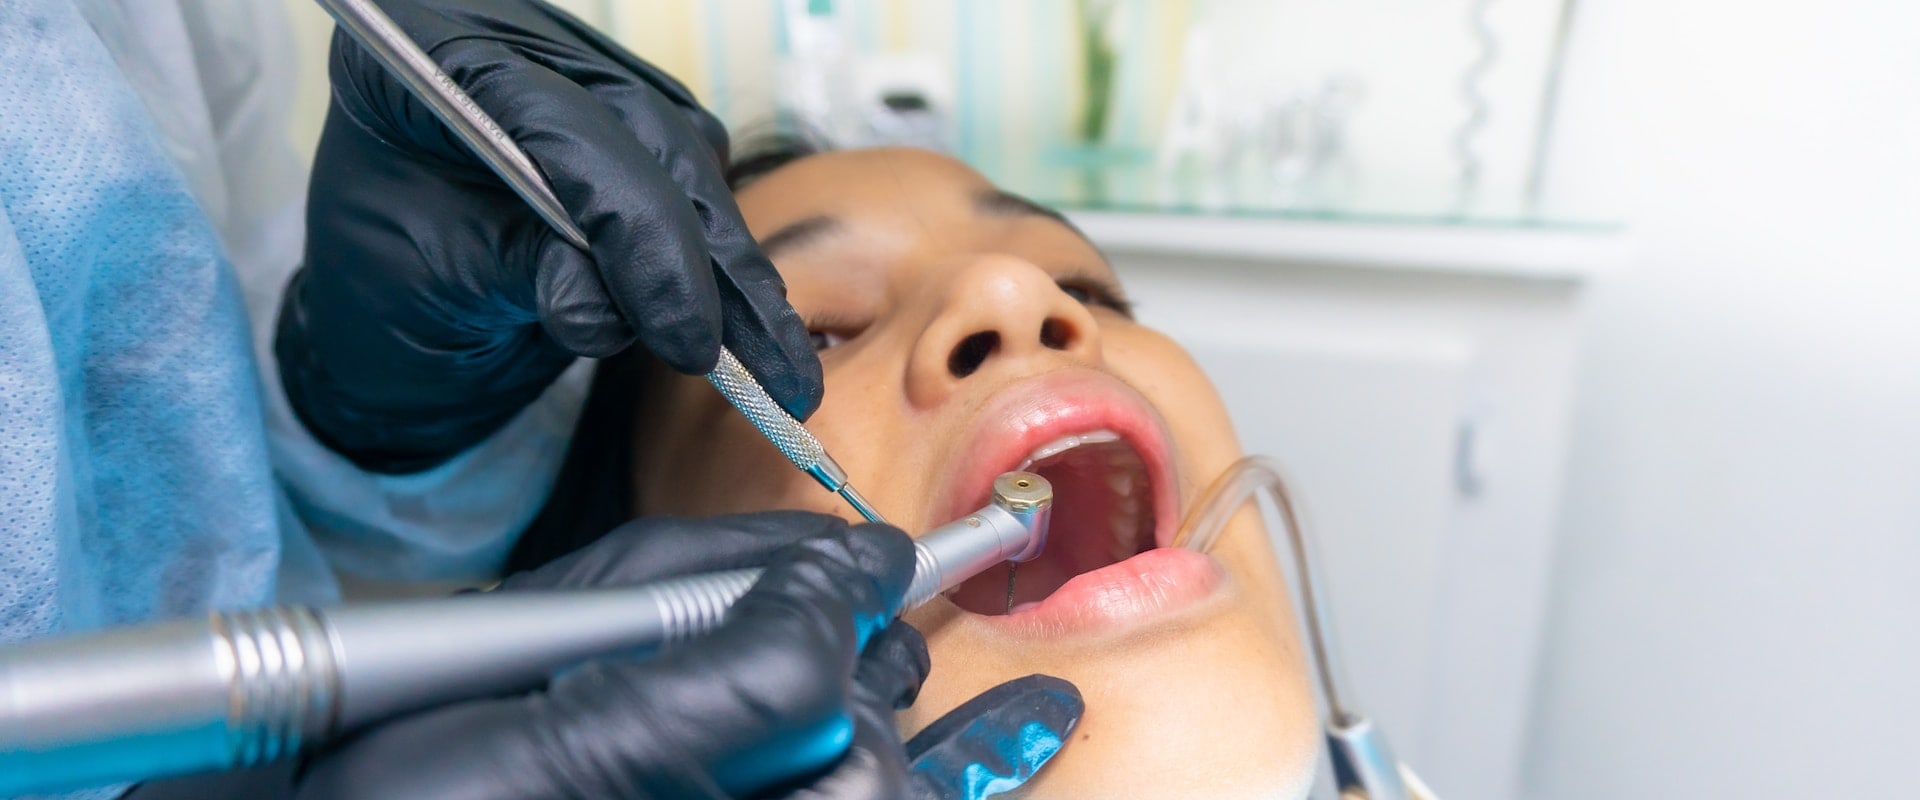 The Versatility Of Laser Dentistry: Addressing Common Dental Issues In Boerne, TX